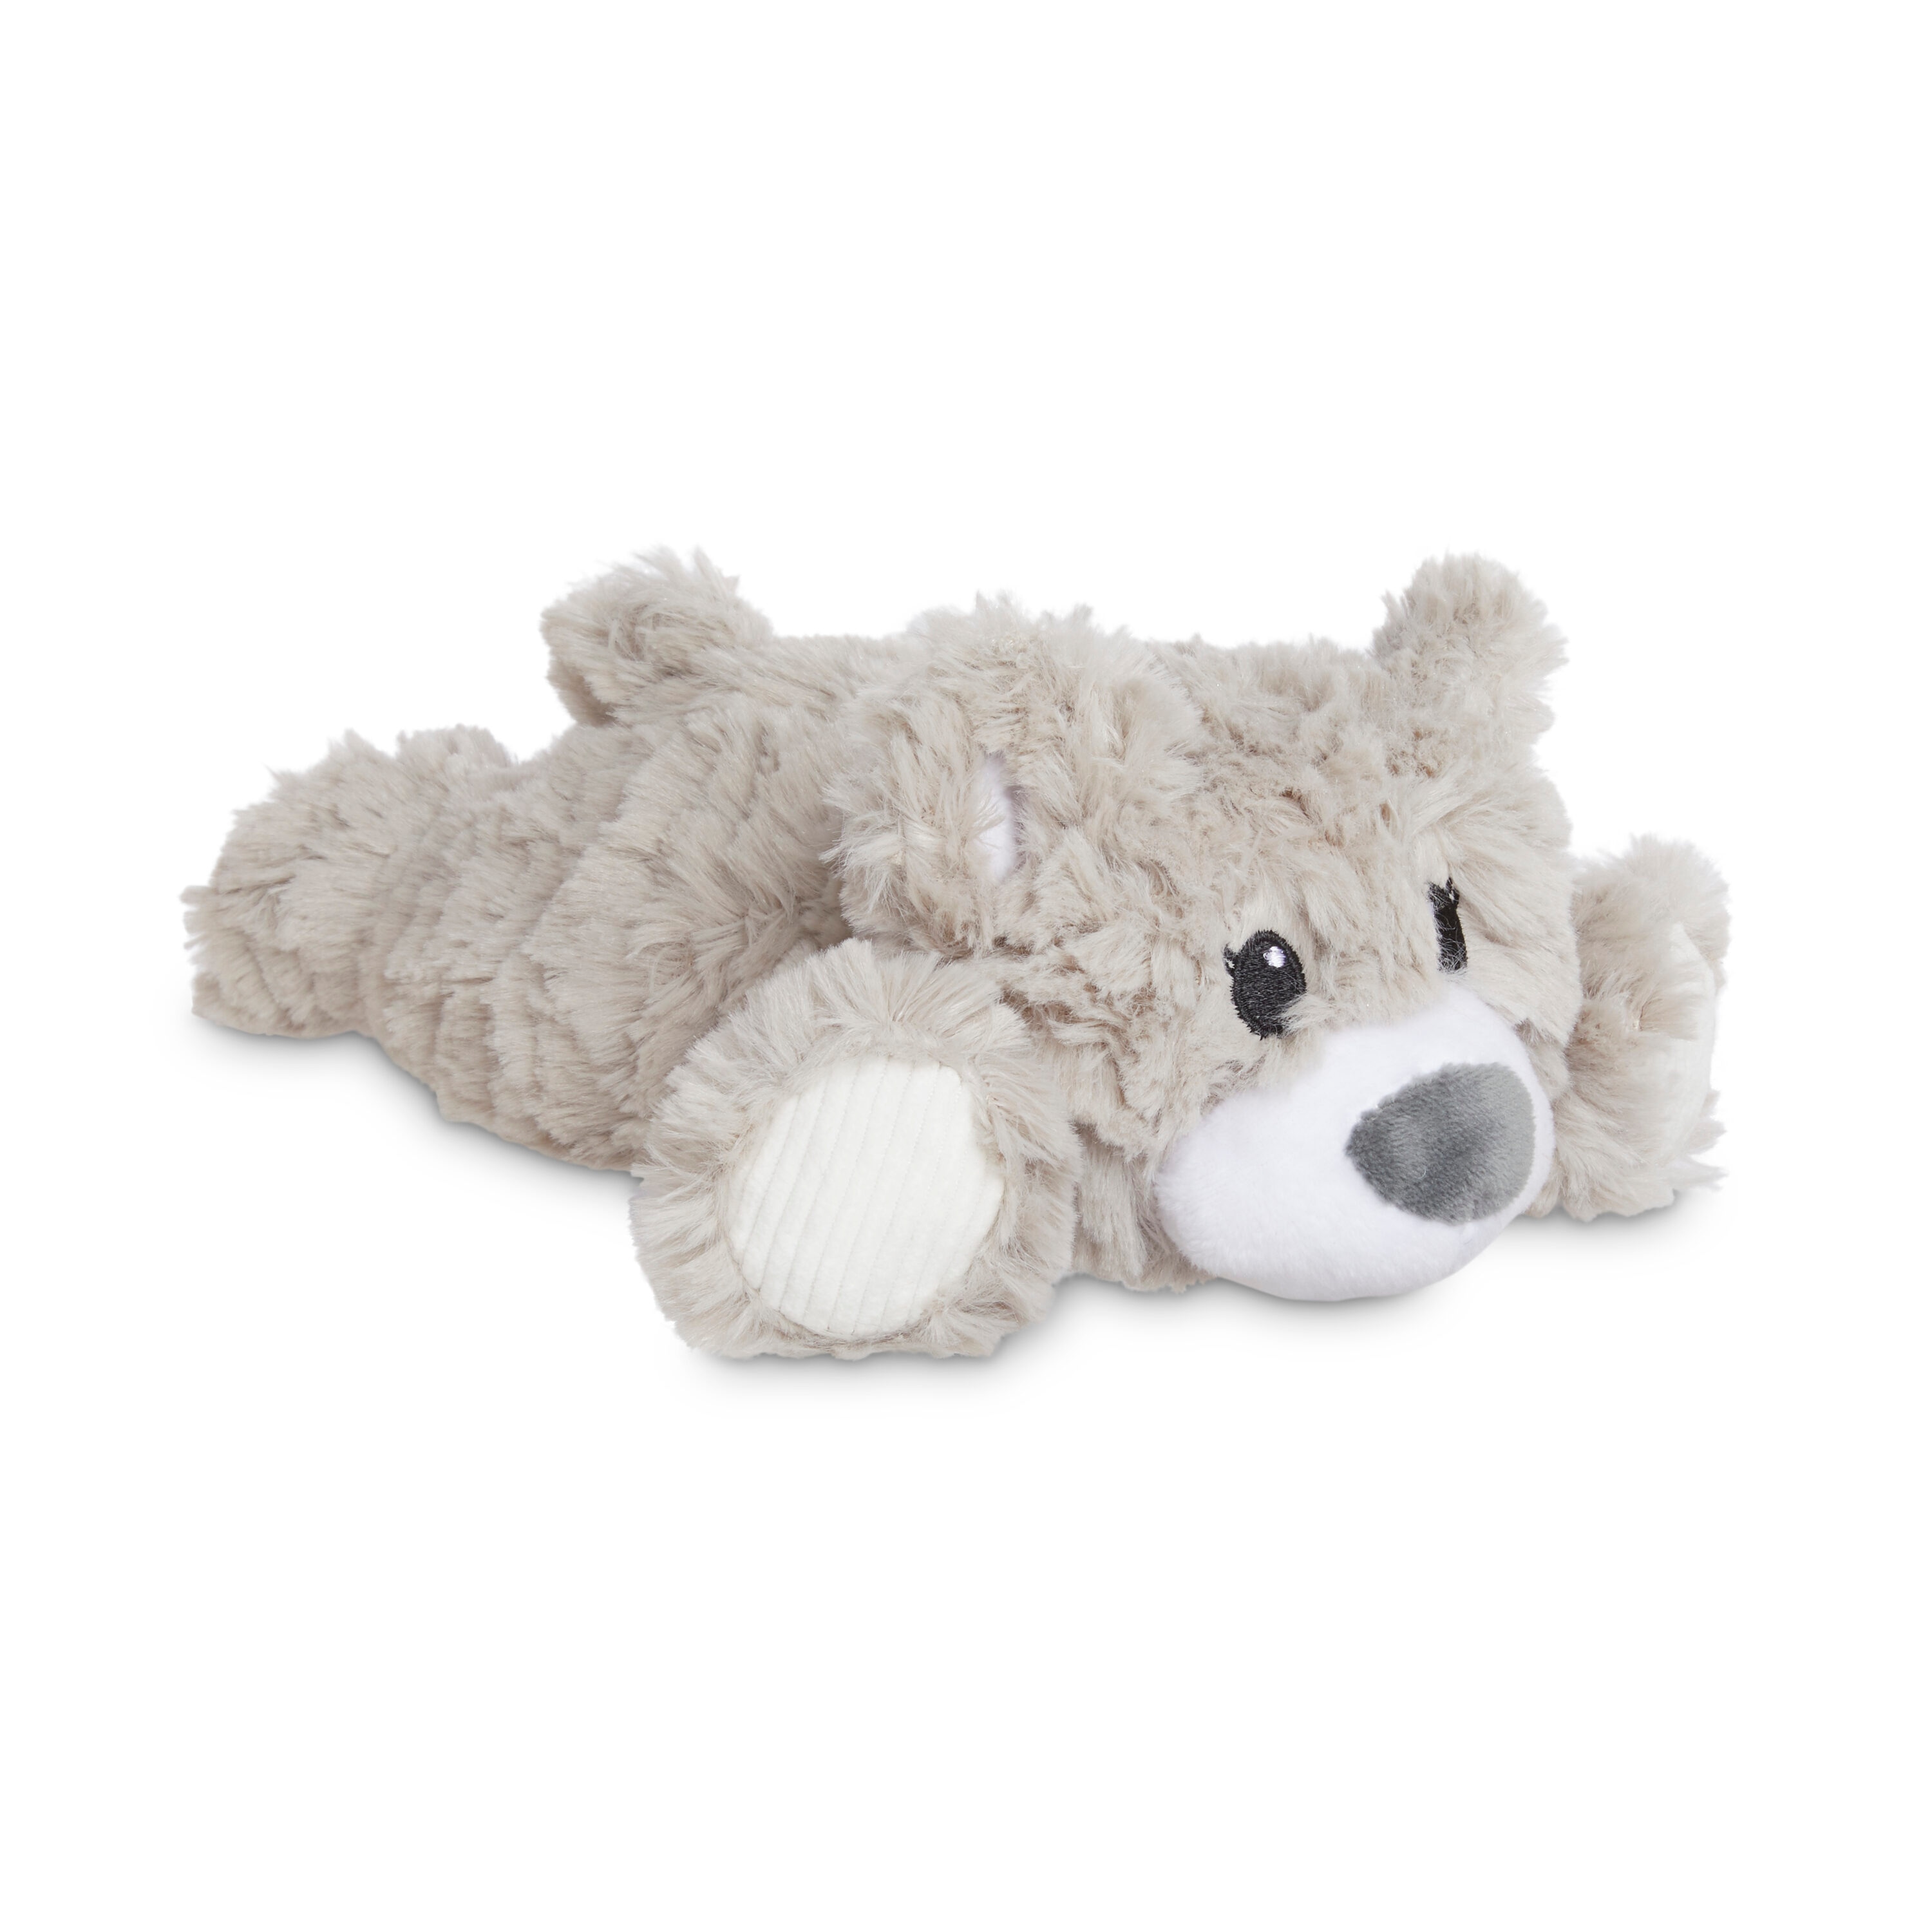 Attachment Theory Plush Bear with Squeaker Toy for Dogs